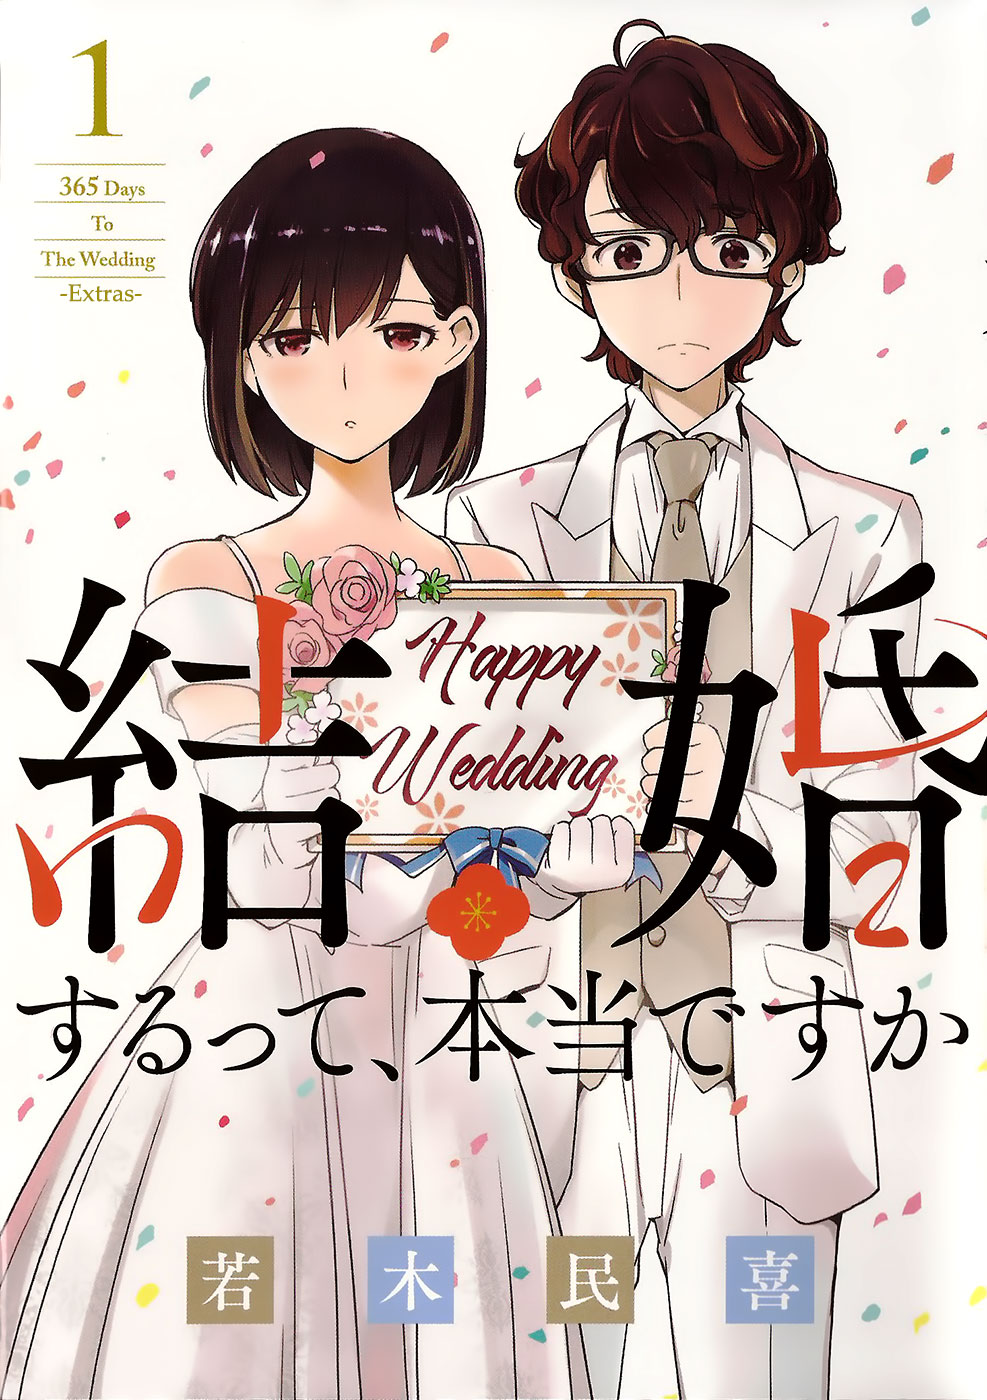 Are You Really Getting Married? Vol. 1 Ch. 8.5 Volume 1 Extras